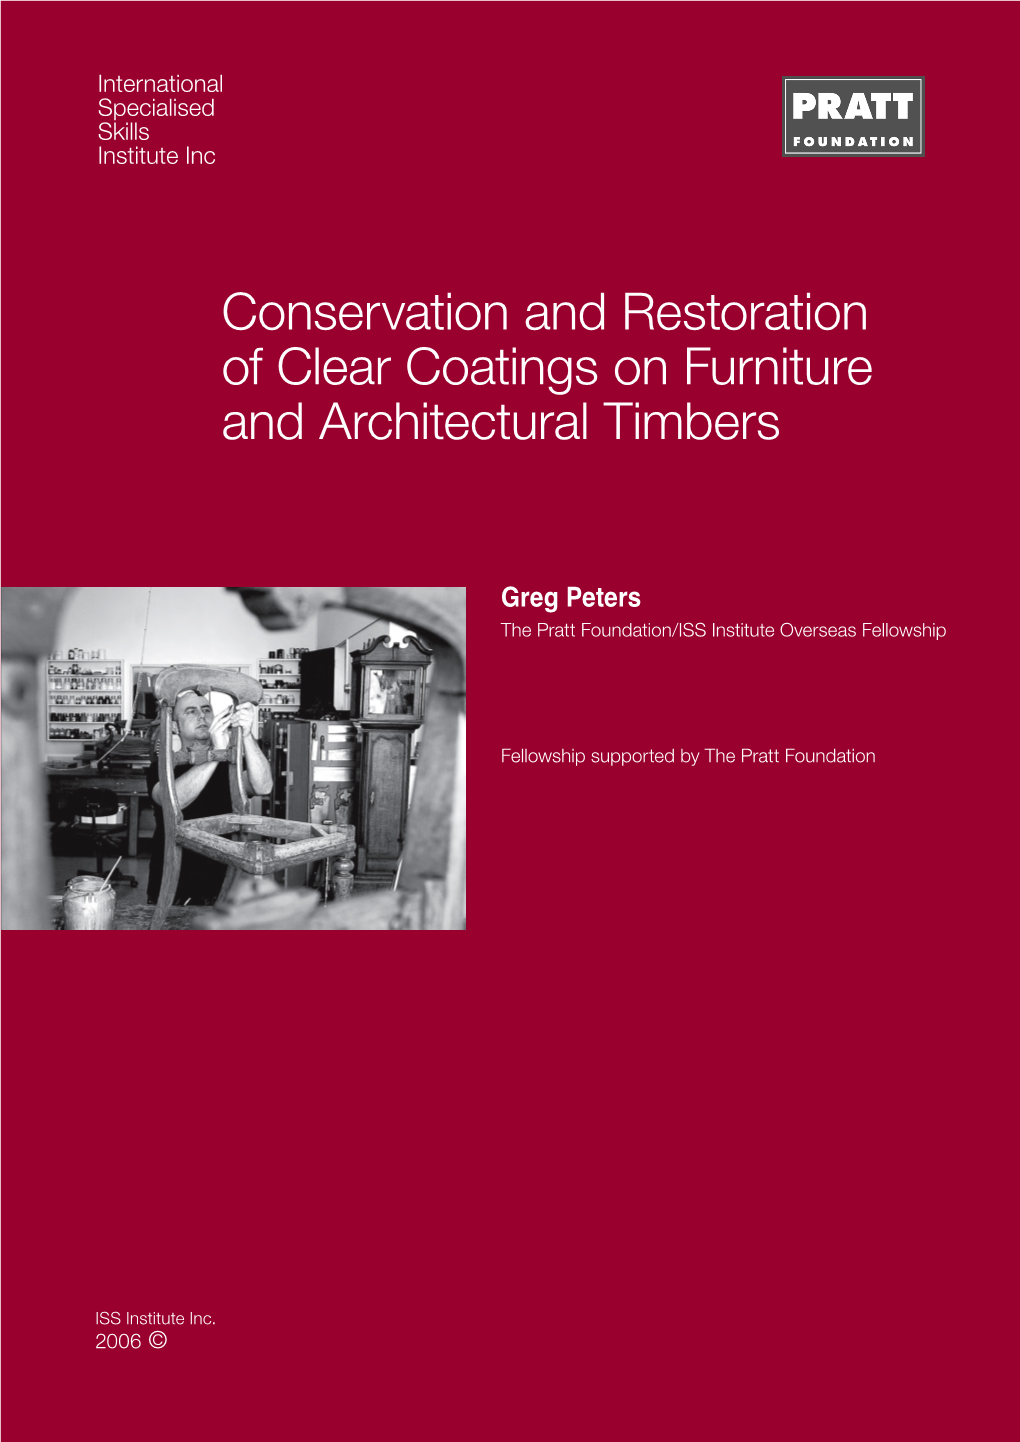 Conservation and Restoration of Clear Coatings on Furniture and Architectural Timbers